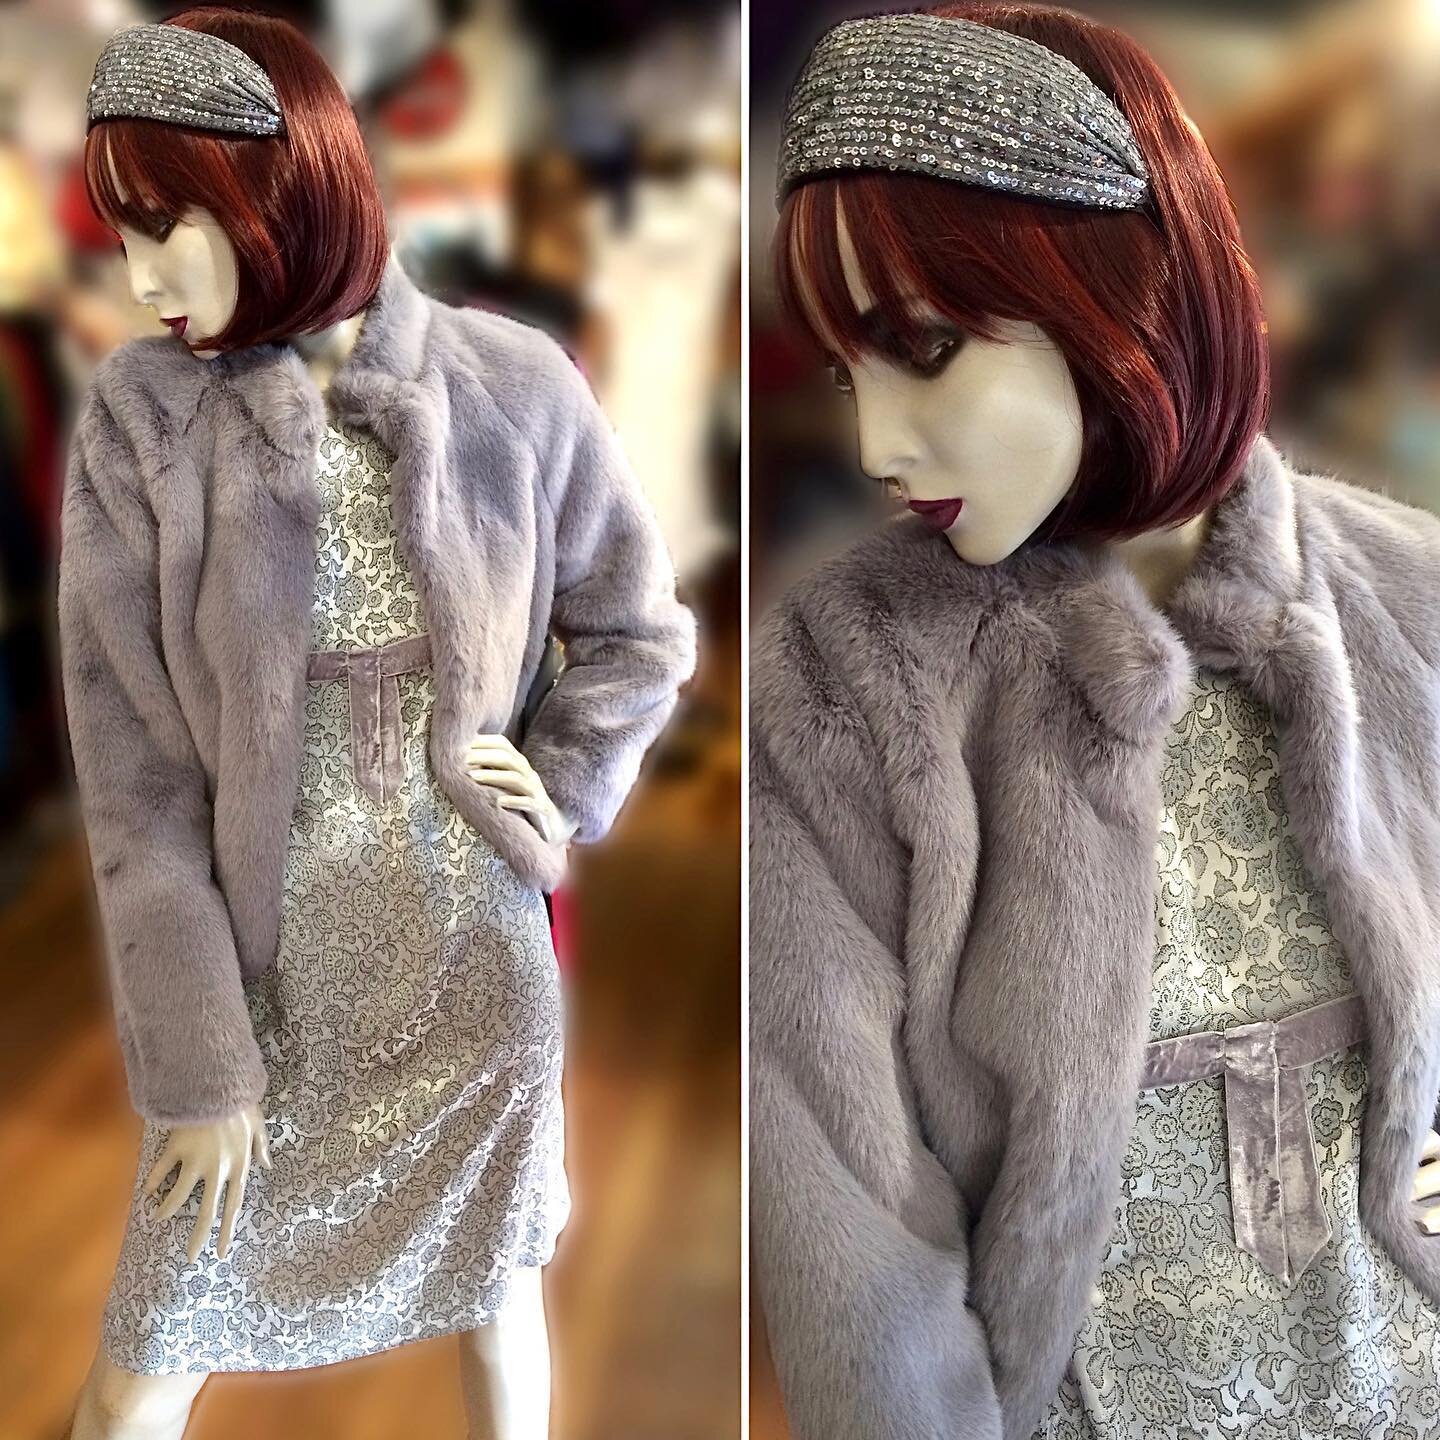 Vintage 1960s classic silver satin brocade shift dress with a simple velvet bow, paired with a new faux fur jacket and glammed up with a silver sequinned headband. Dress available in store at Leura and jacket and headband available online on our webs